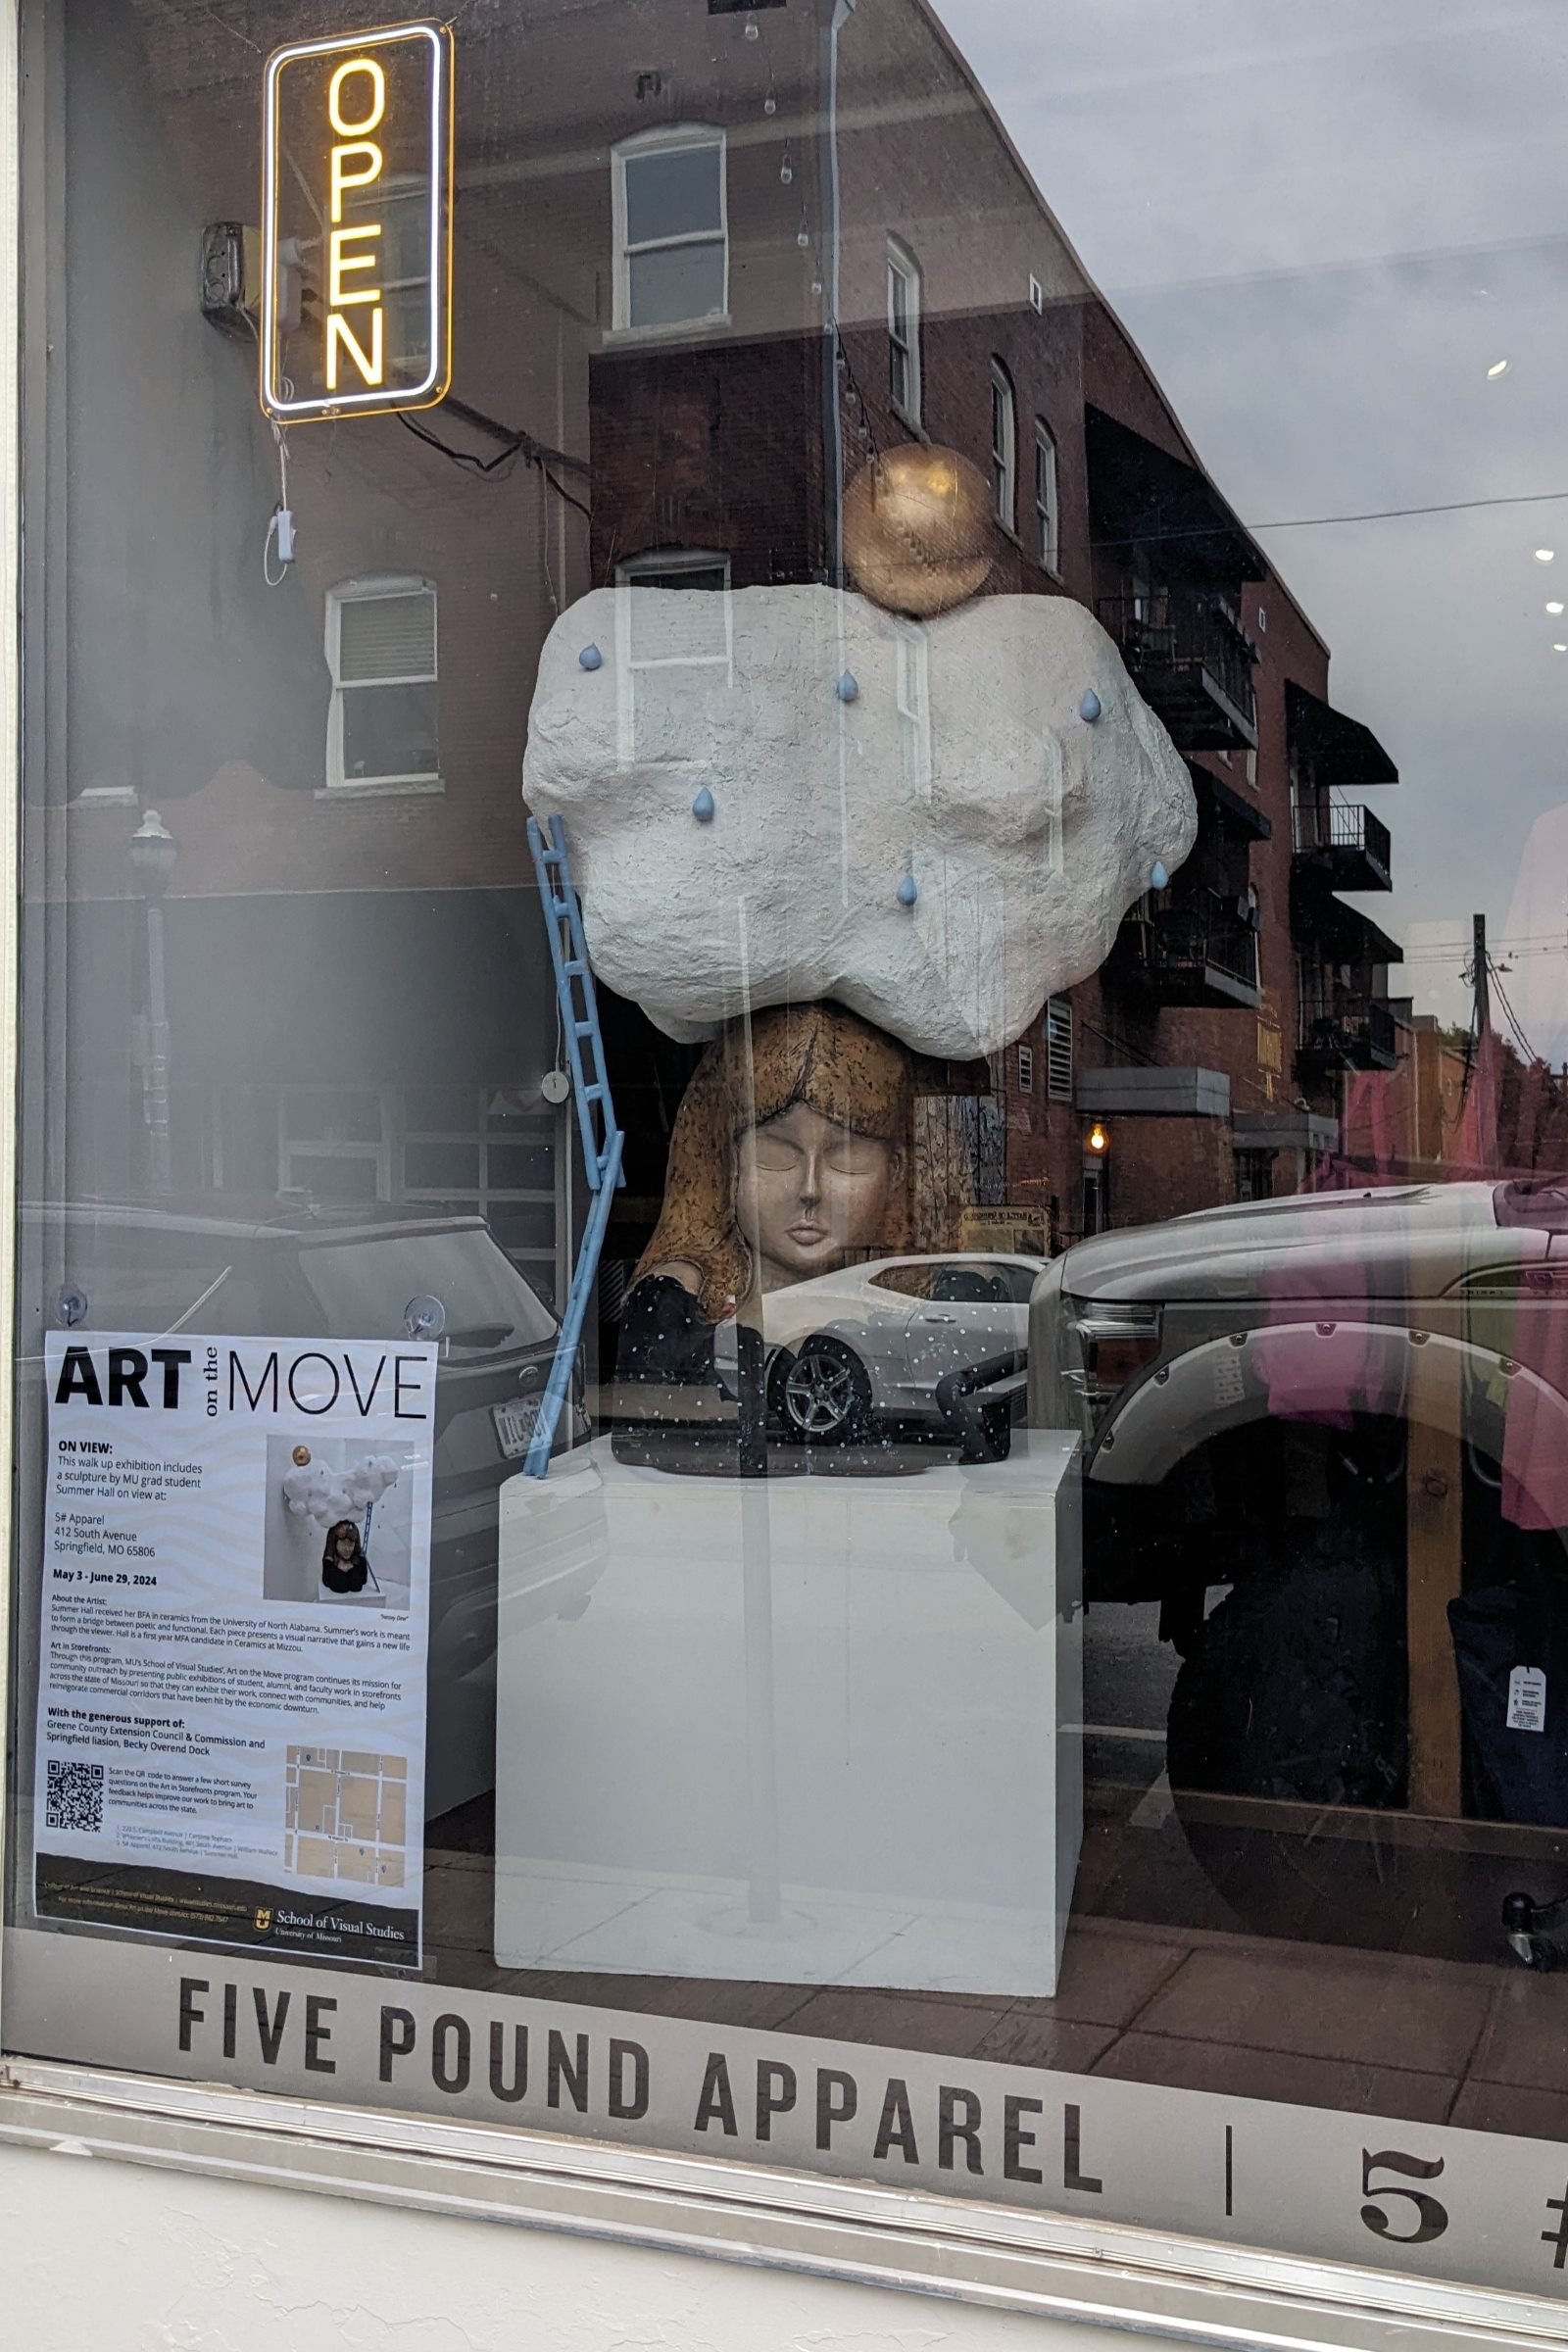 A sculpture of a woman with a cloud on her head is on display in the front window of 5 Pound Apparel in downtown Springfield, Missouri.